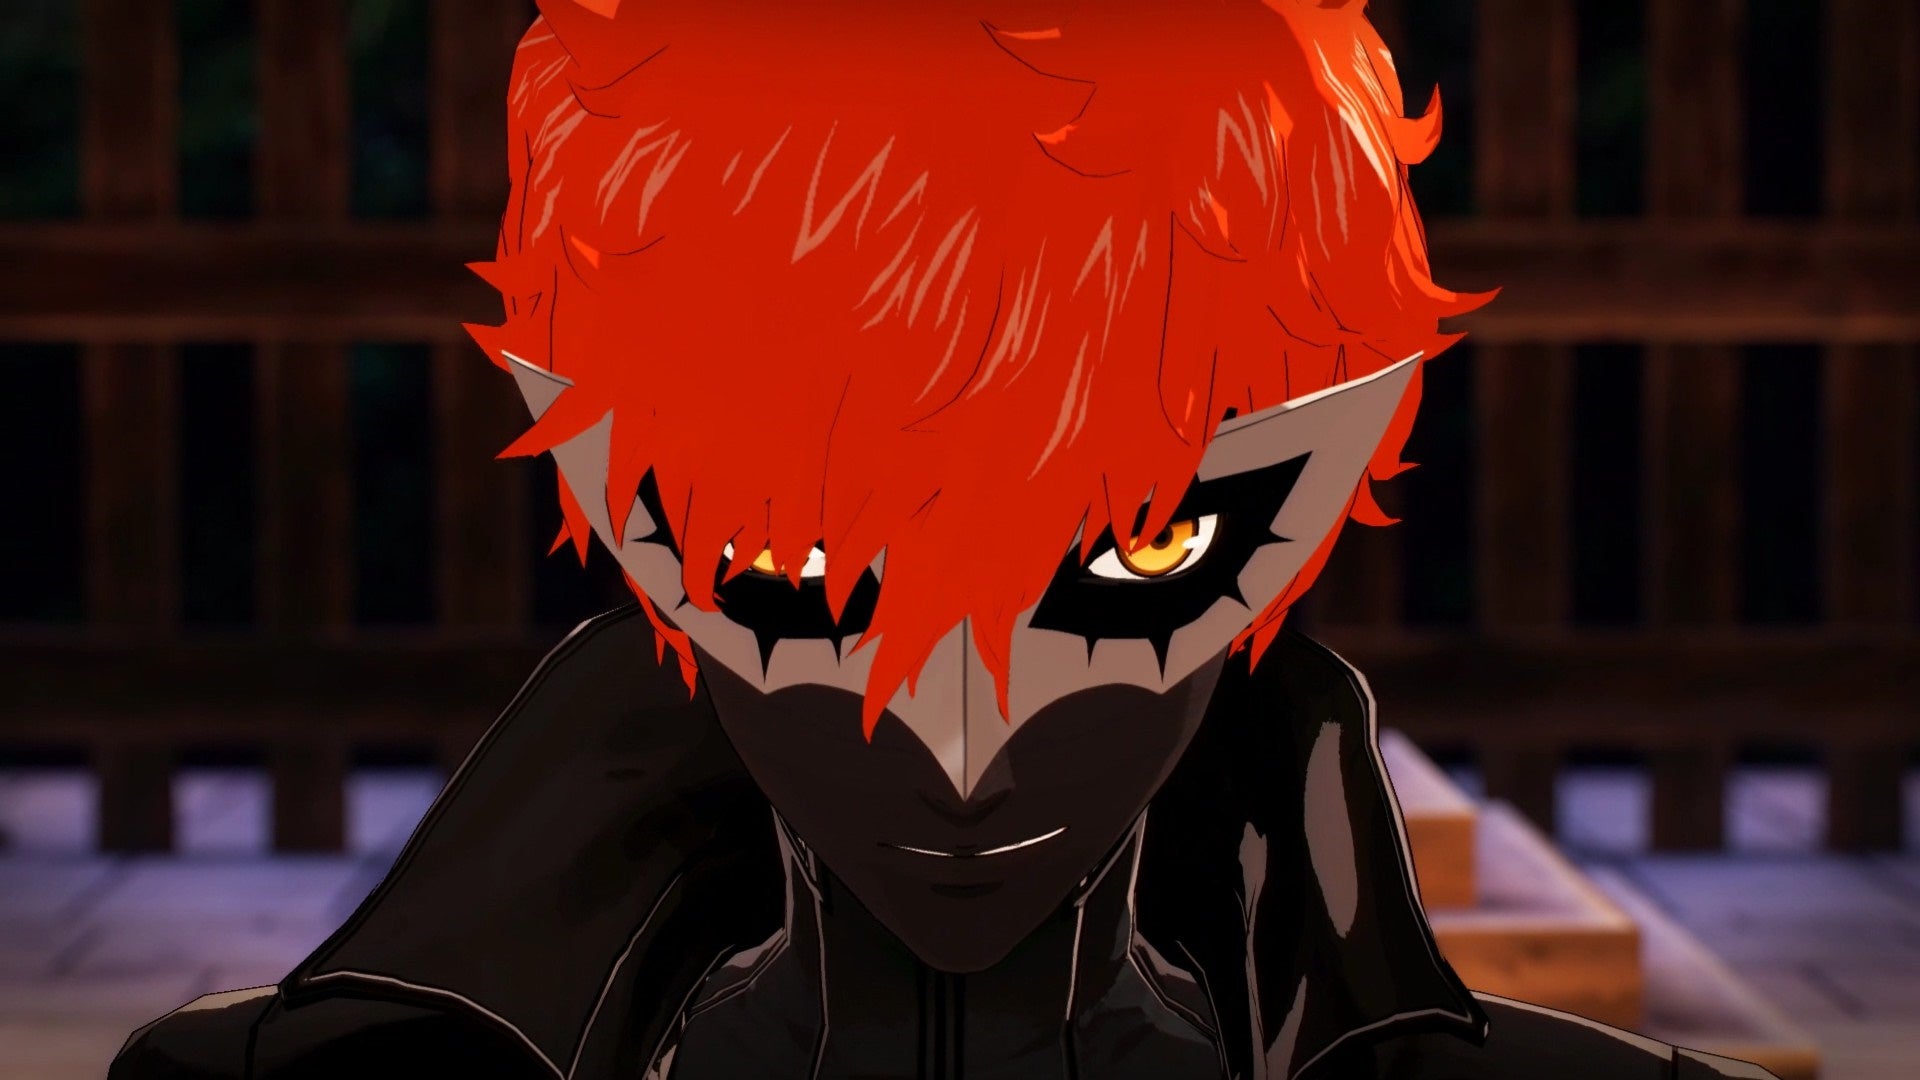 Joker looks at the camera and smirks in Persona 5 Strikers.